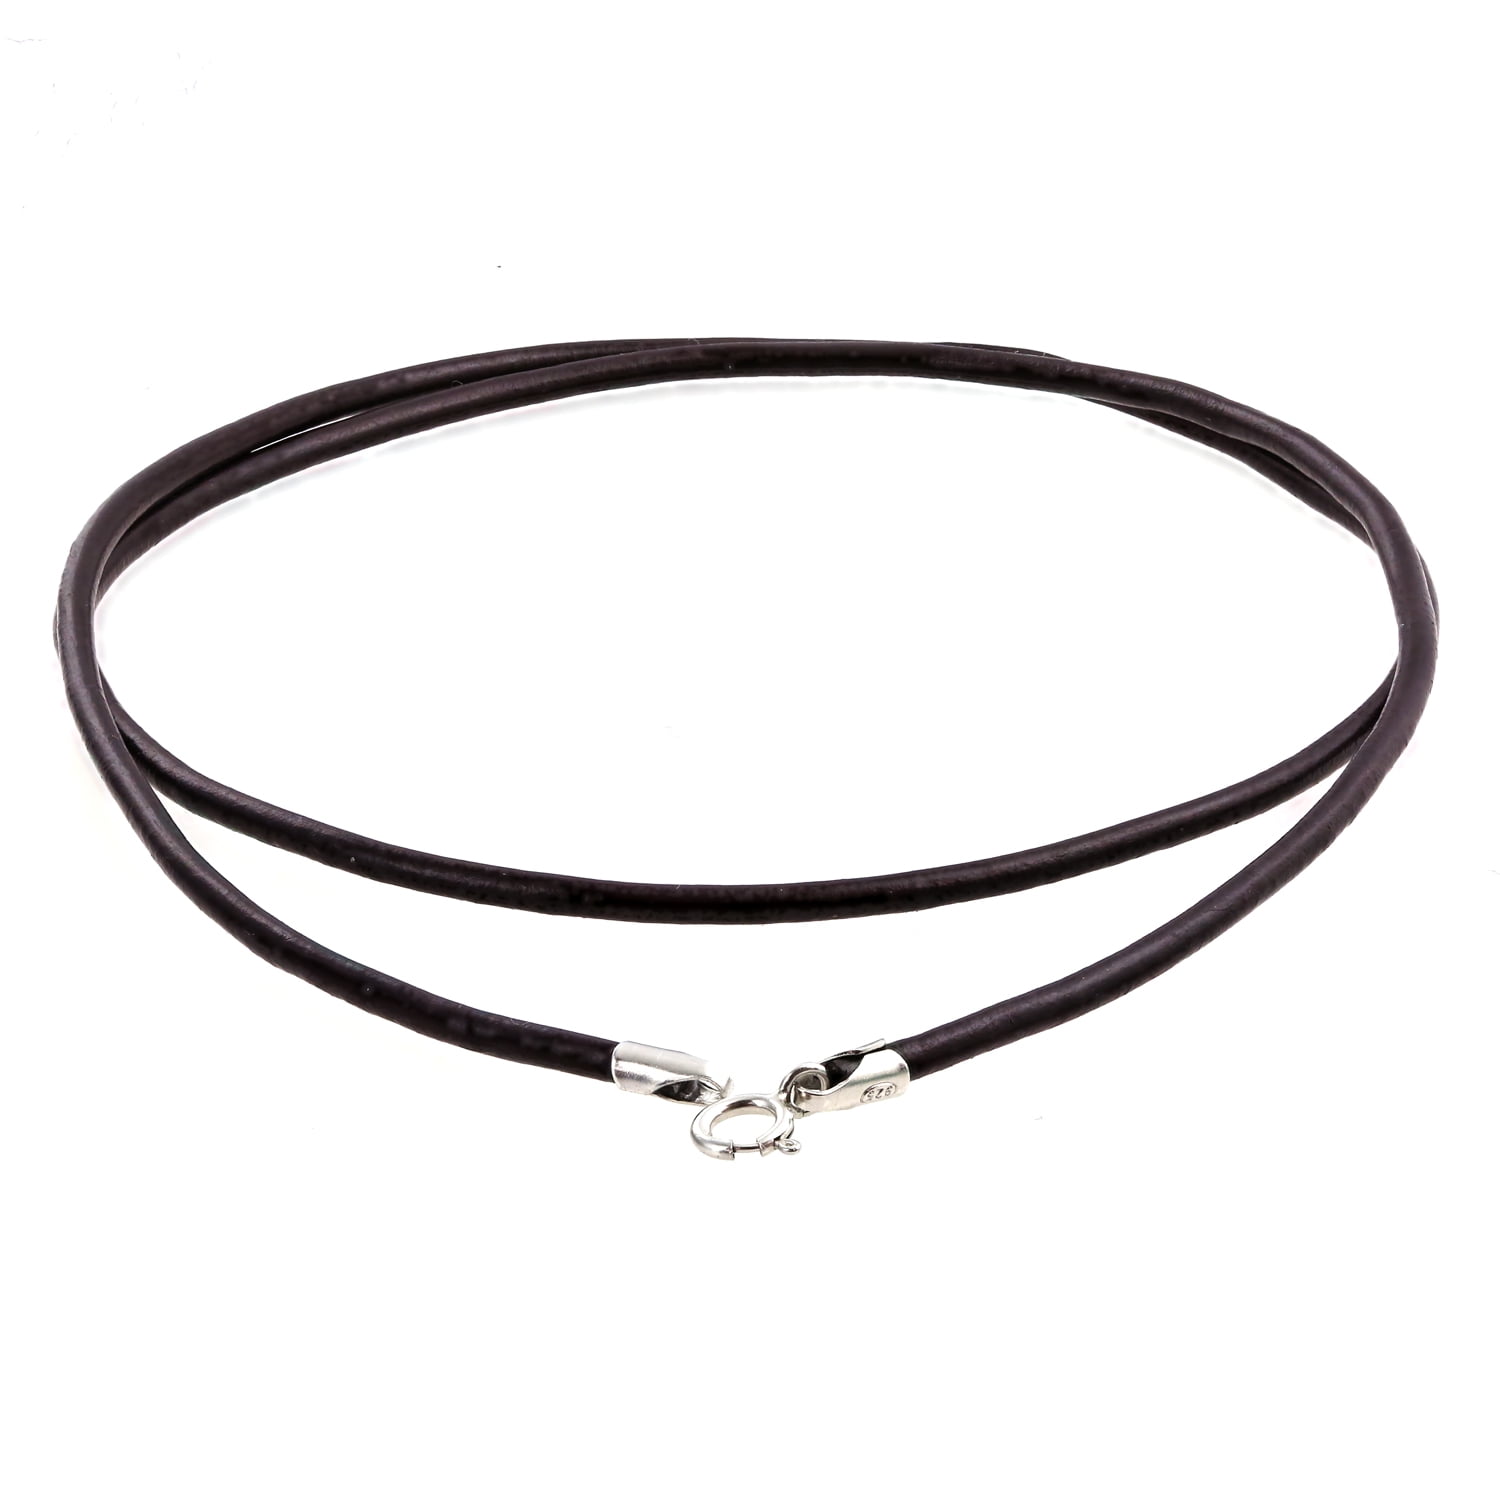 James Avery Braided Black Leather Necklace - 24 in.